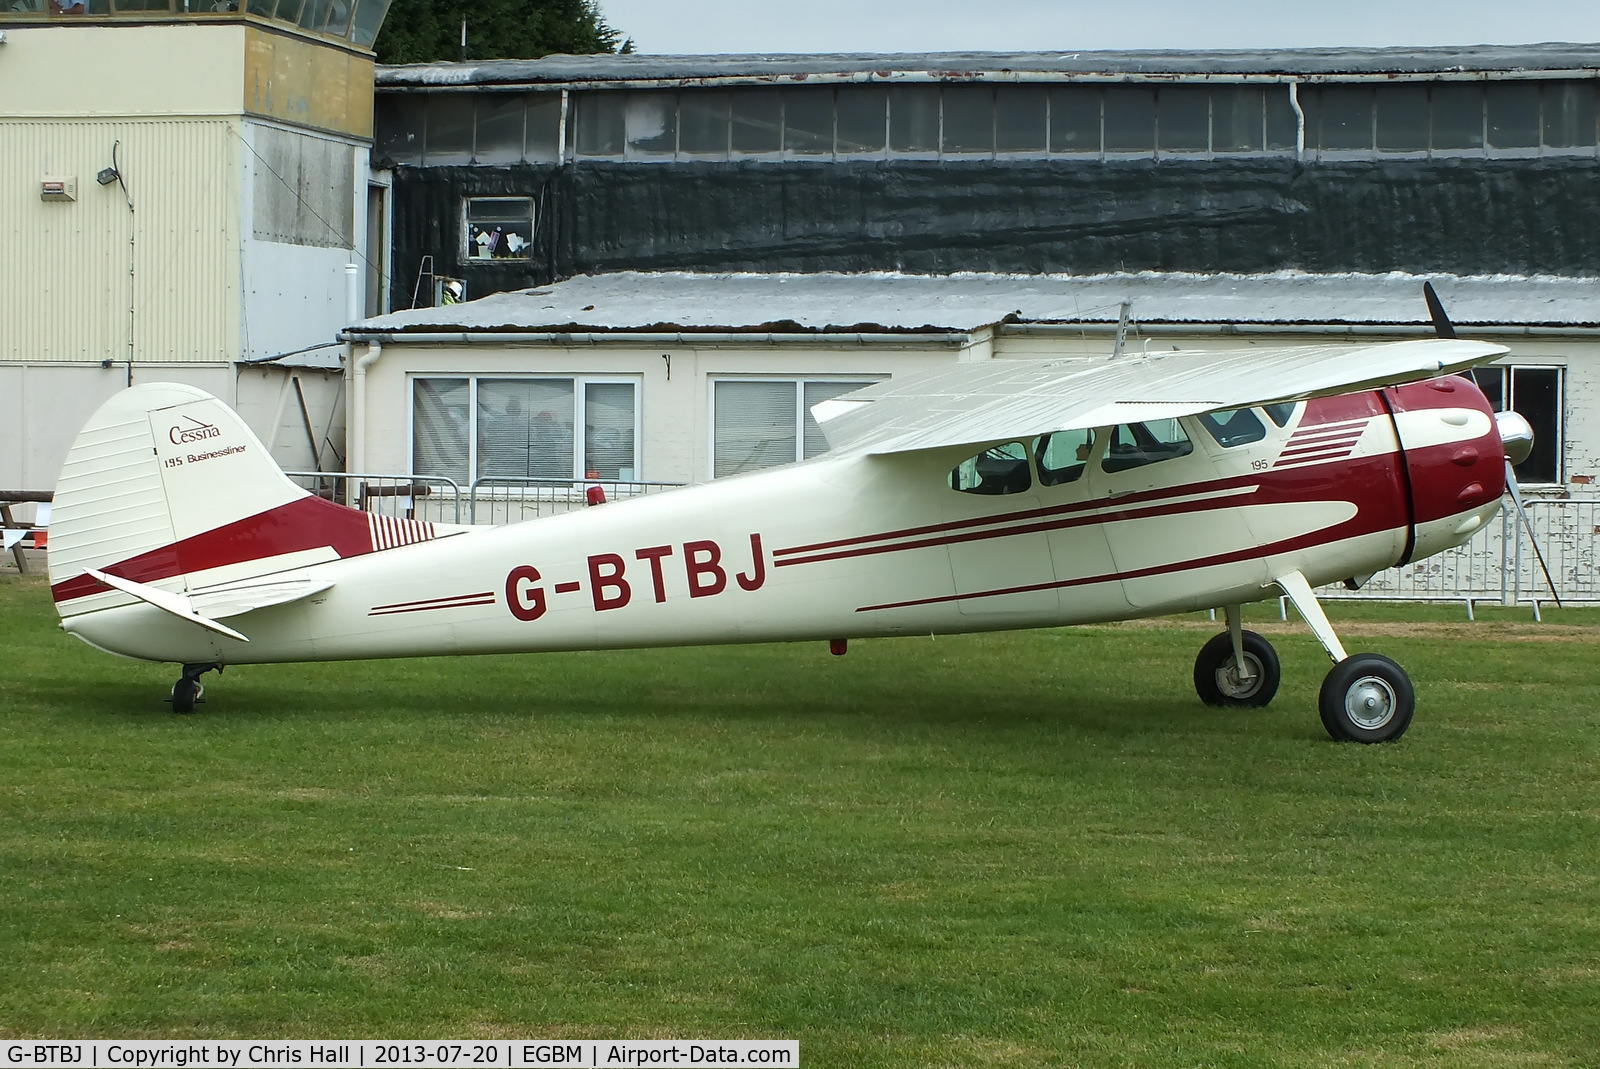 G-BTBJ, , at the Tatenhill Charity Fly in